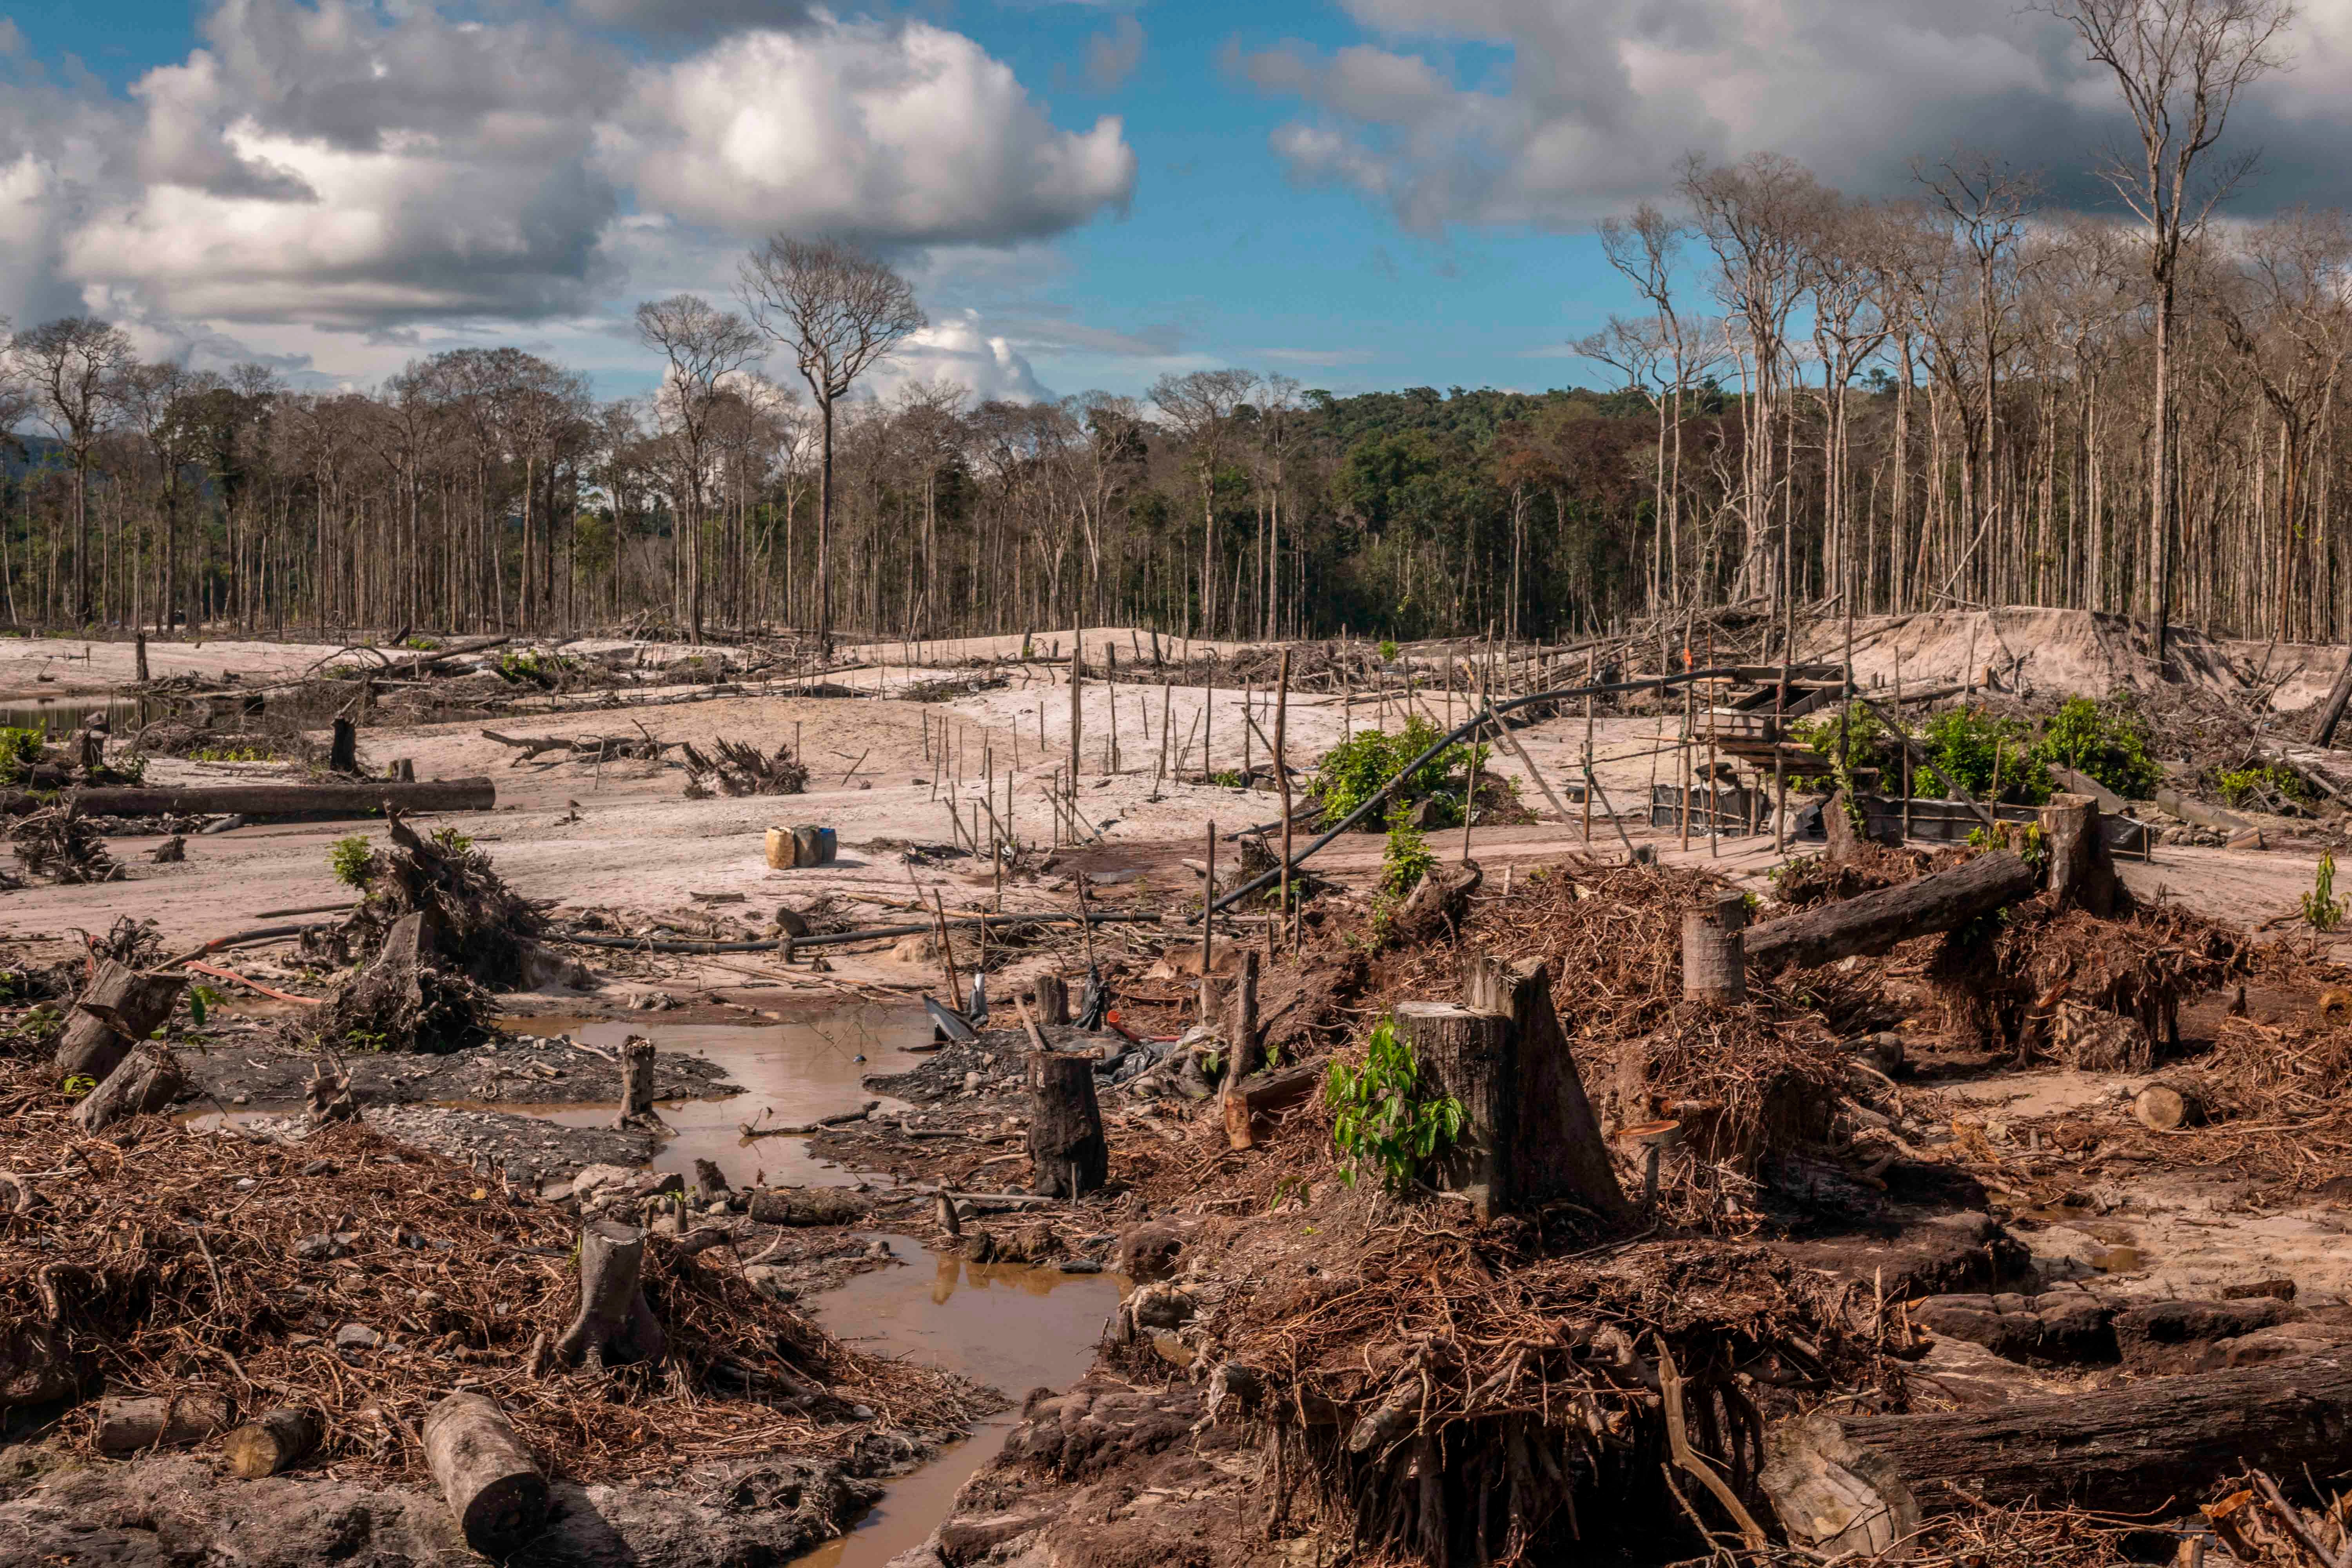 Deforested area in the Yanomami Indigenous Territory, located in the Brazilian states of Roraima and Amazonas, in June 2021.